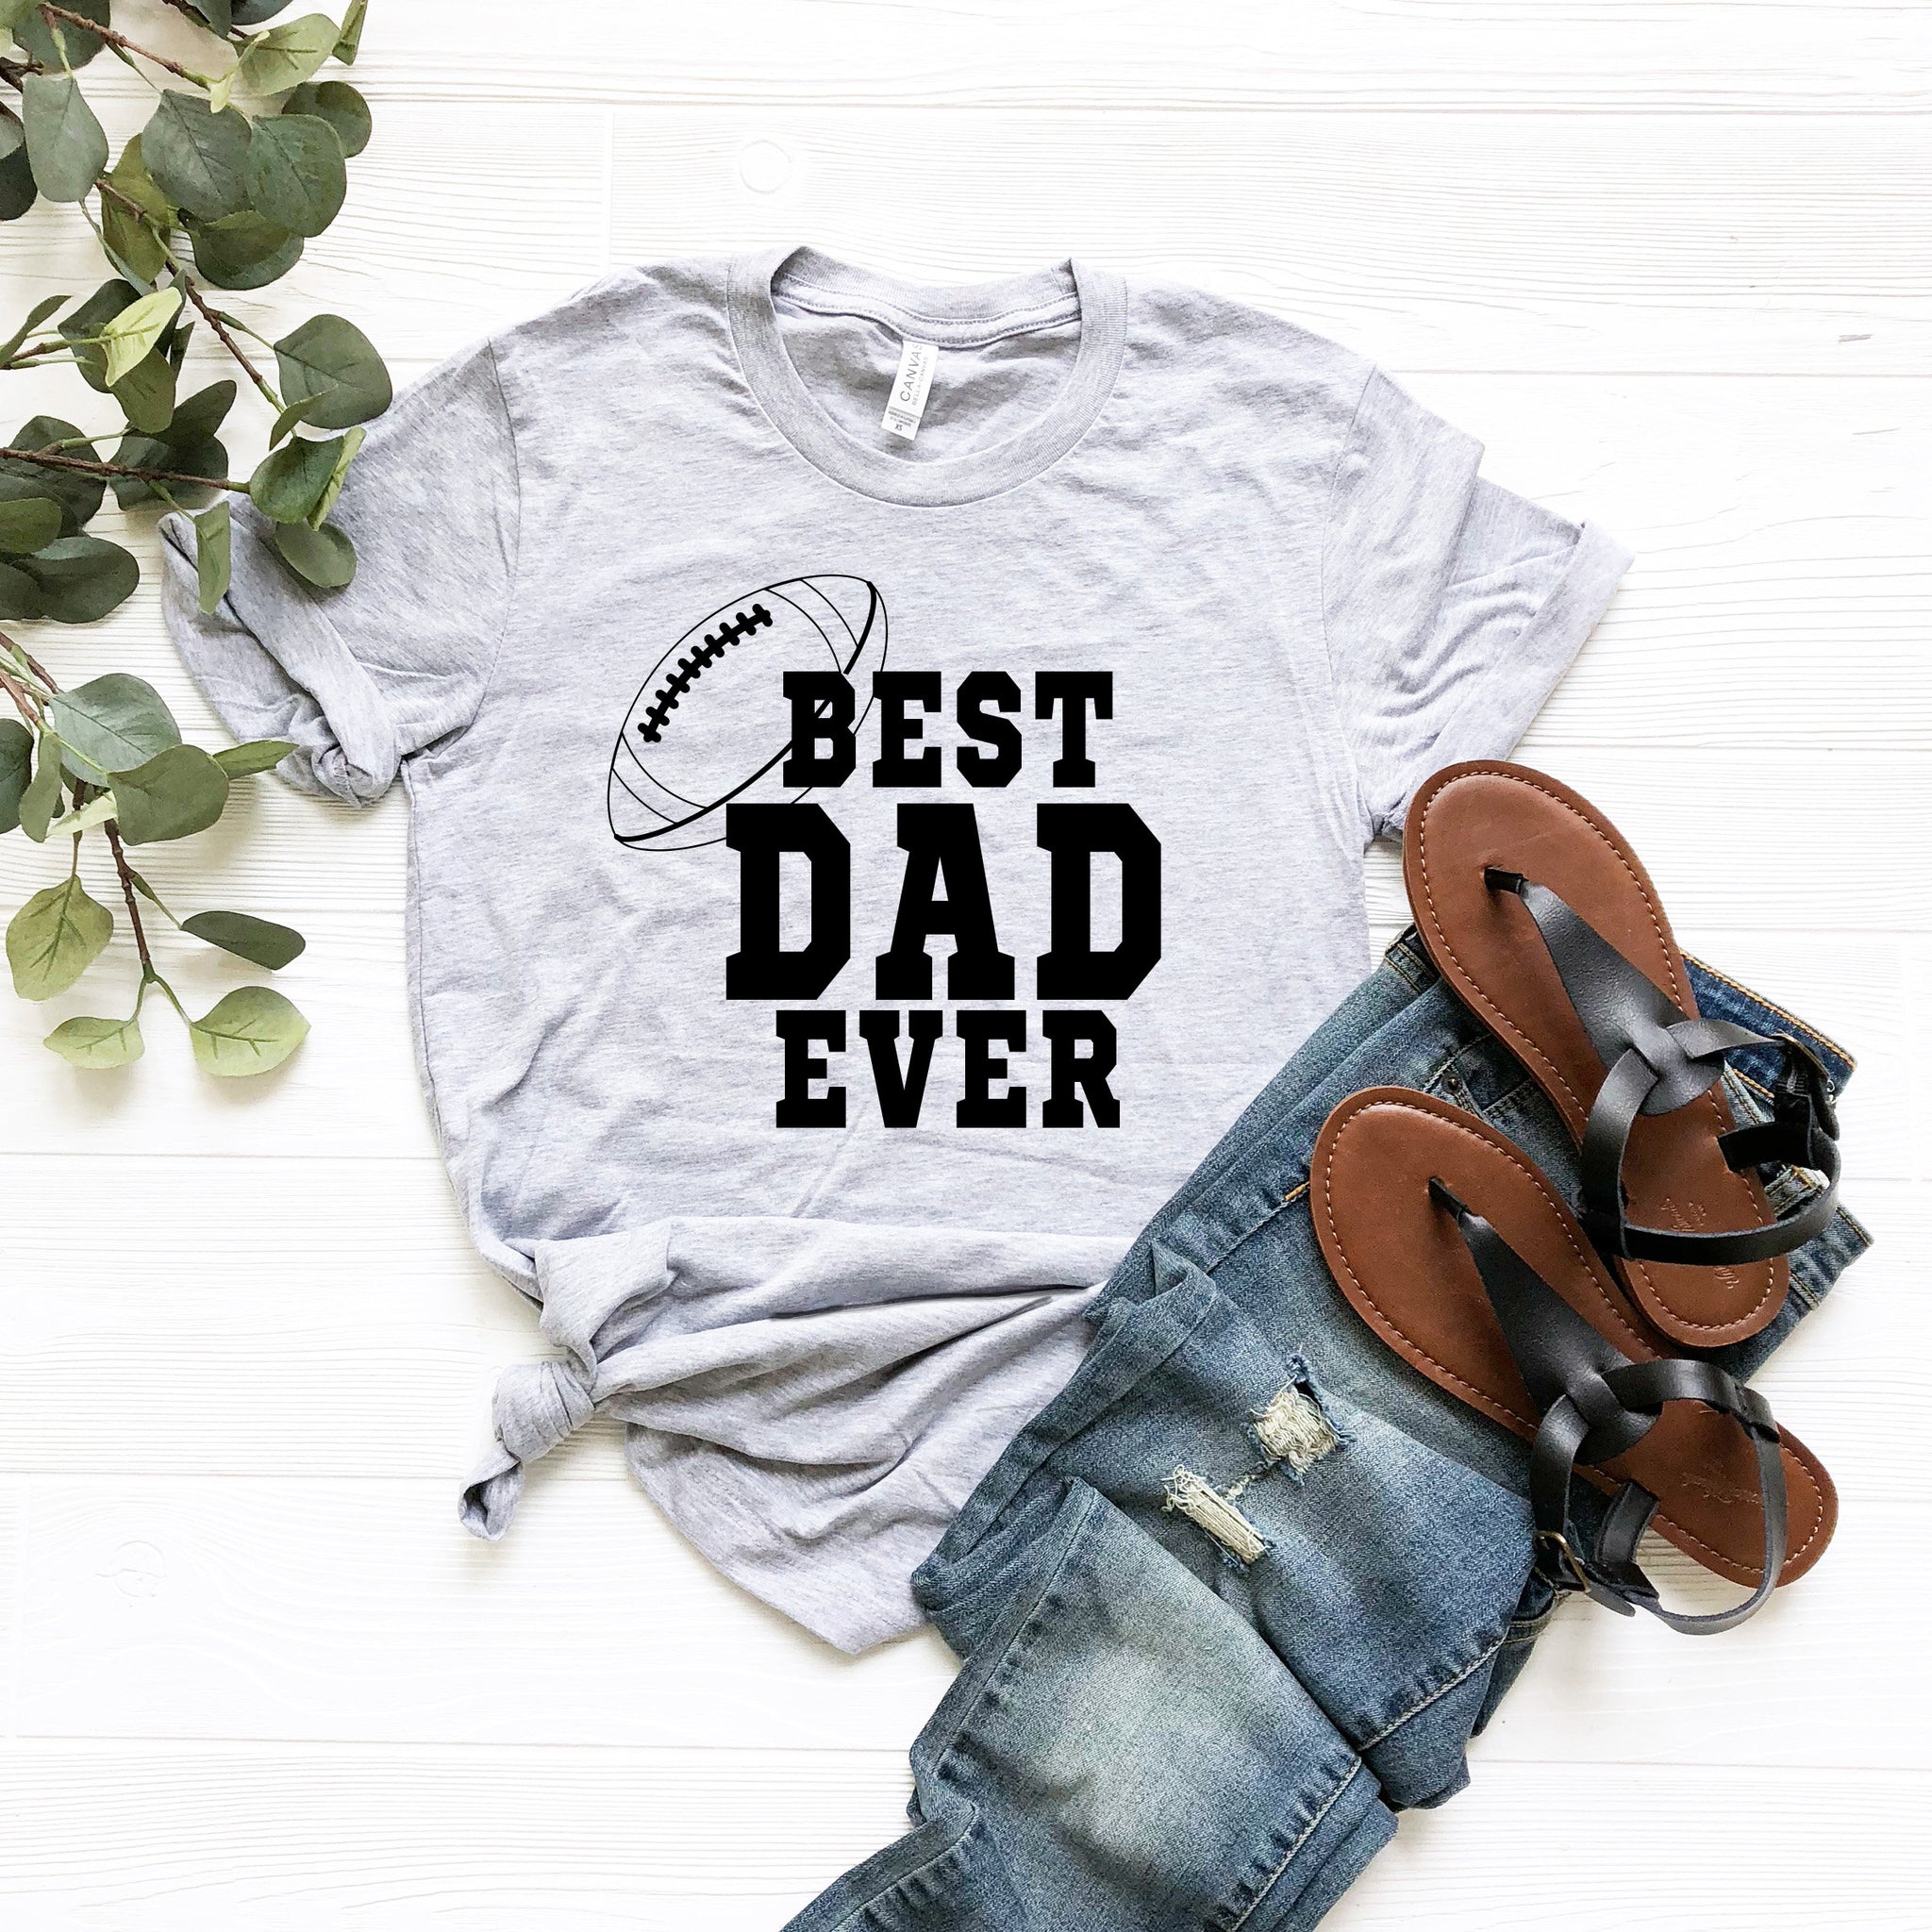 Funny Dad Tshirts for Fathers Day, Dad gift shirts, Dad shirts from daughter, Funny Shirts for husband,Dad Birthday, Football Dad - Fastdeliverytees.com